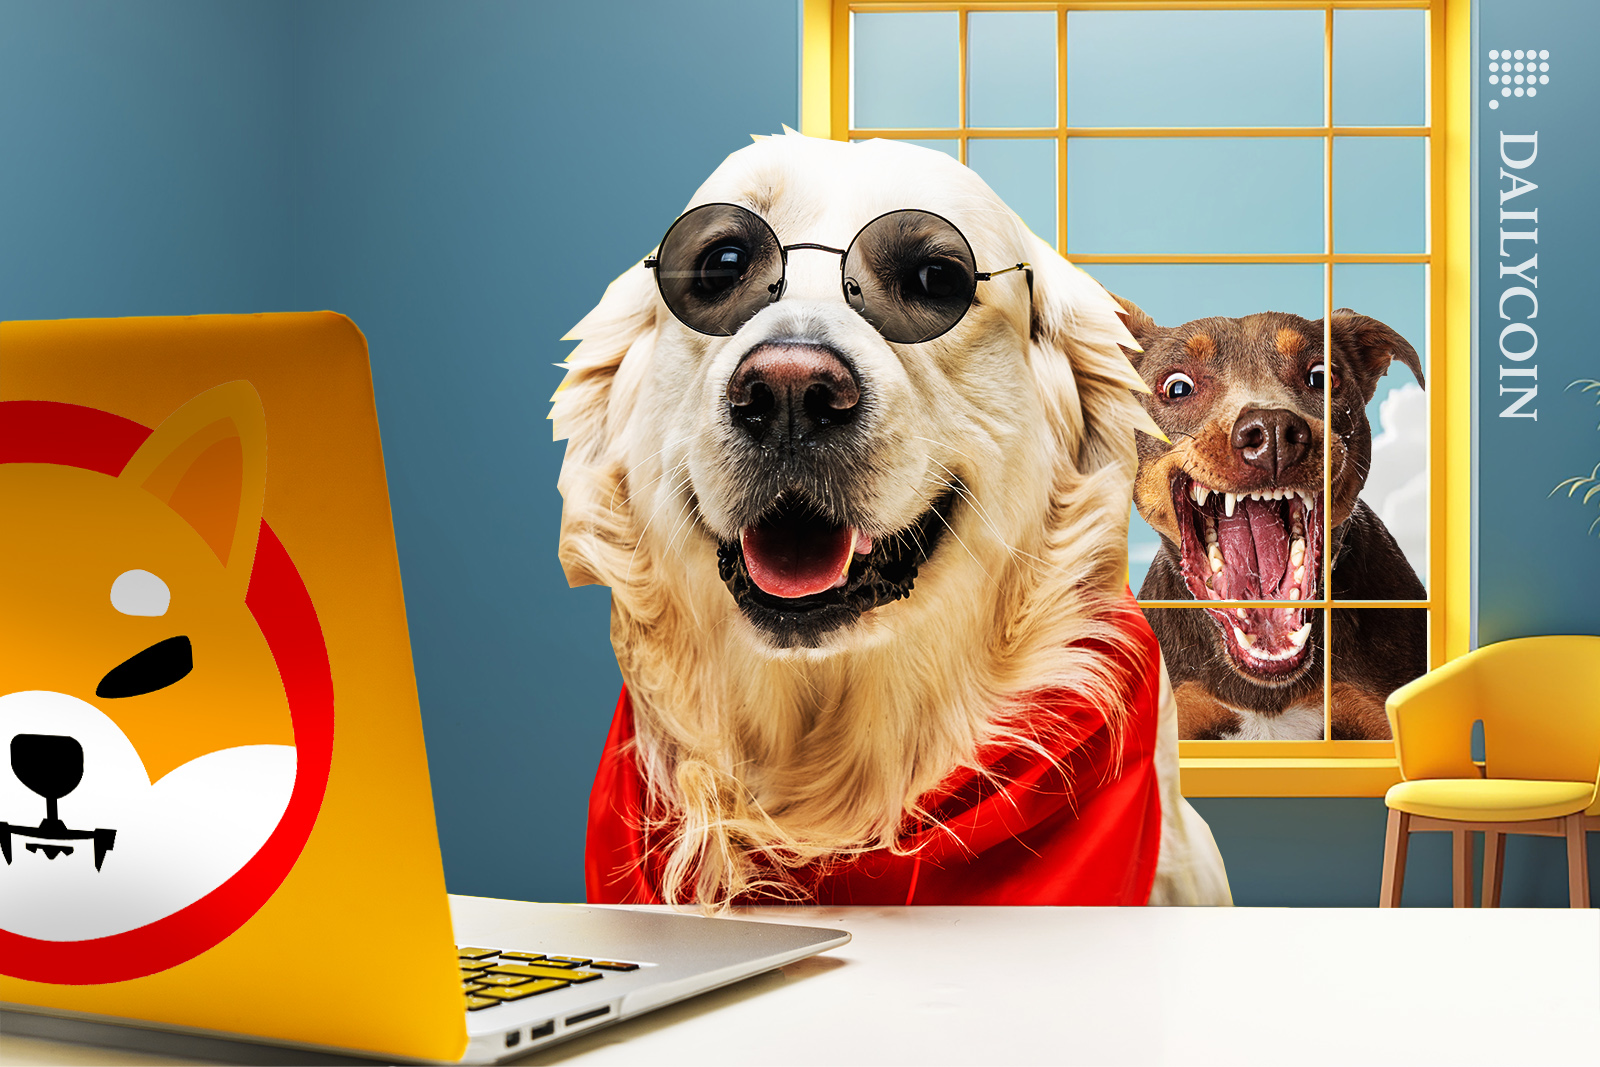 SHIB token investor at a desk and a dog in the background seeing shib token results shocked.